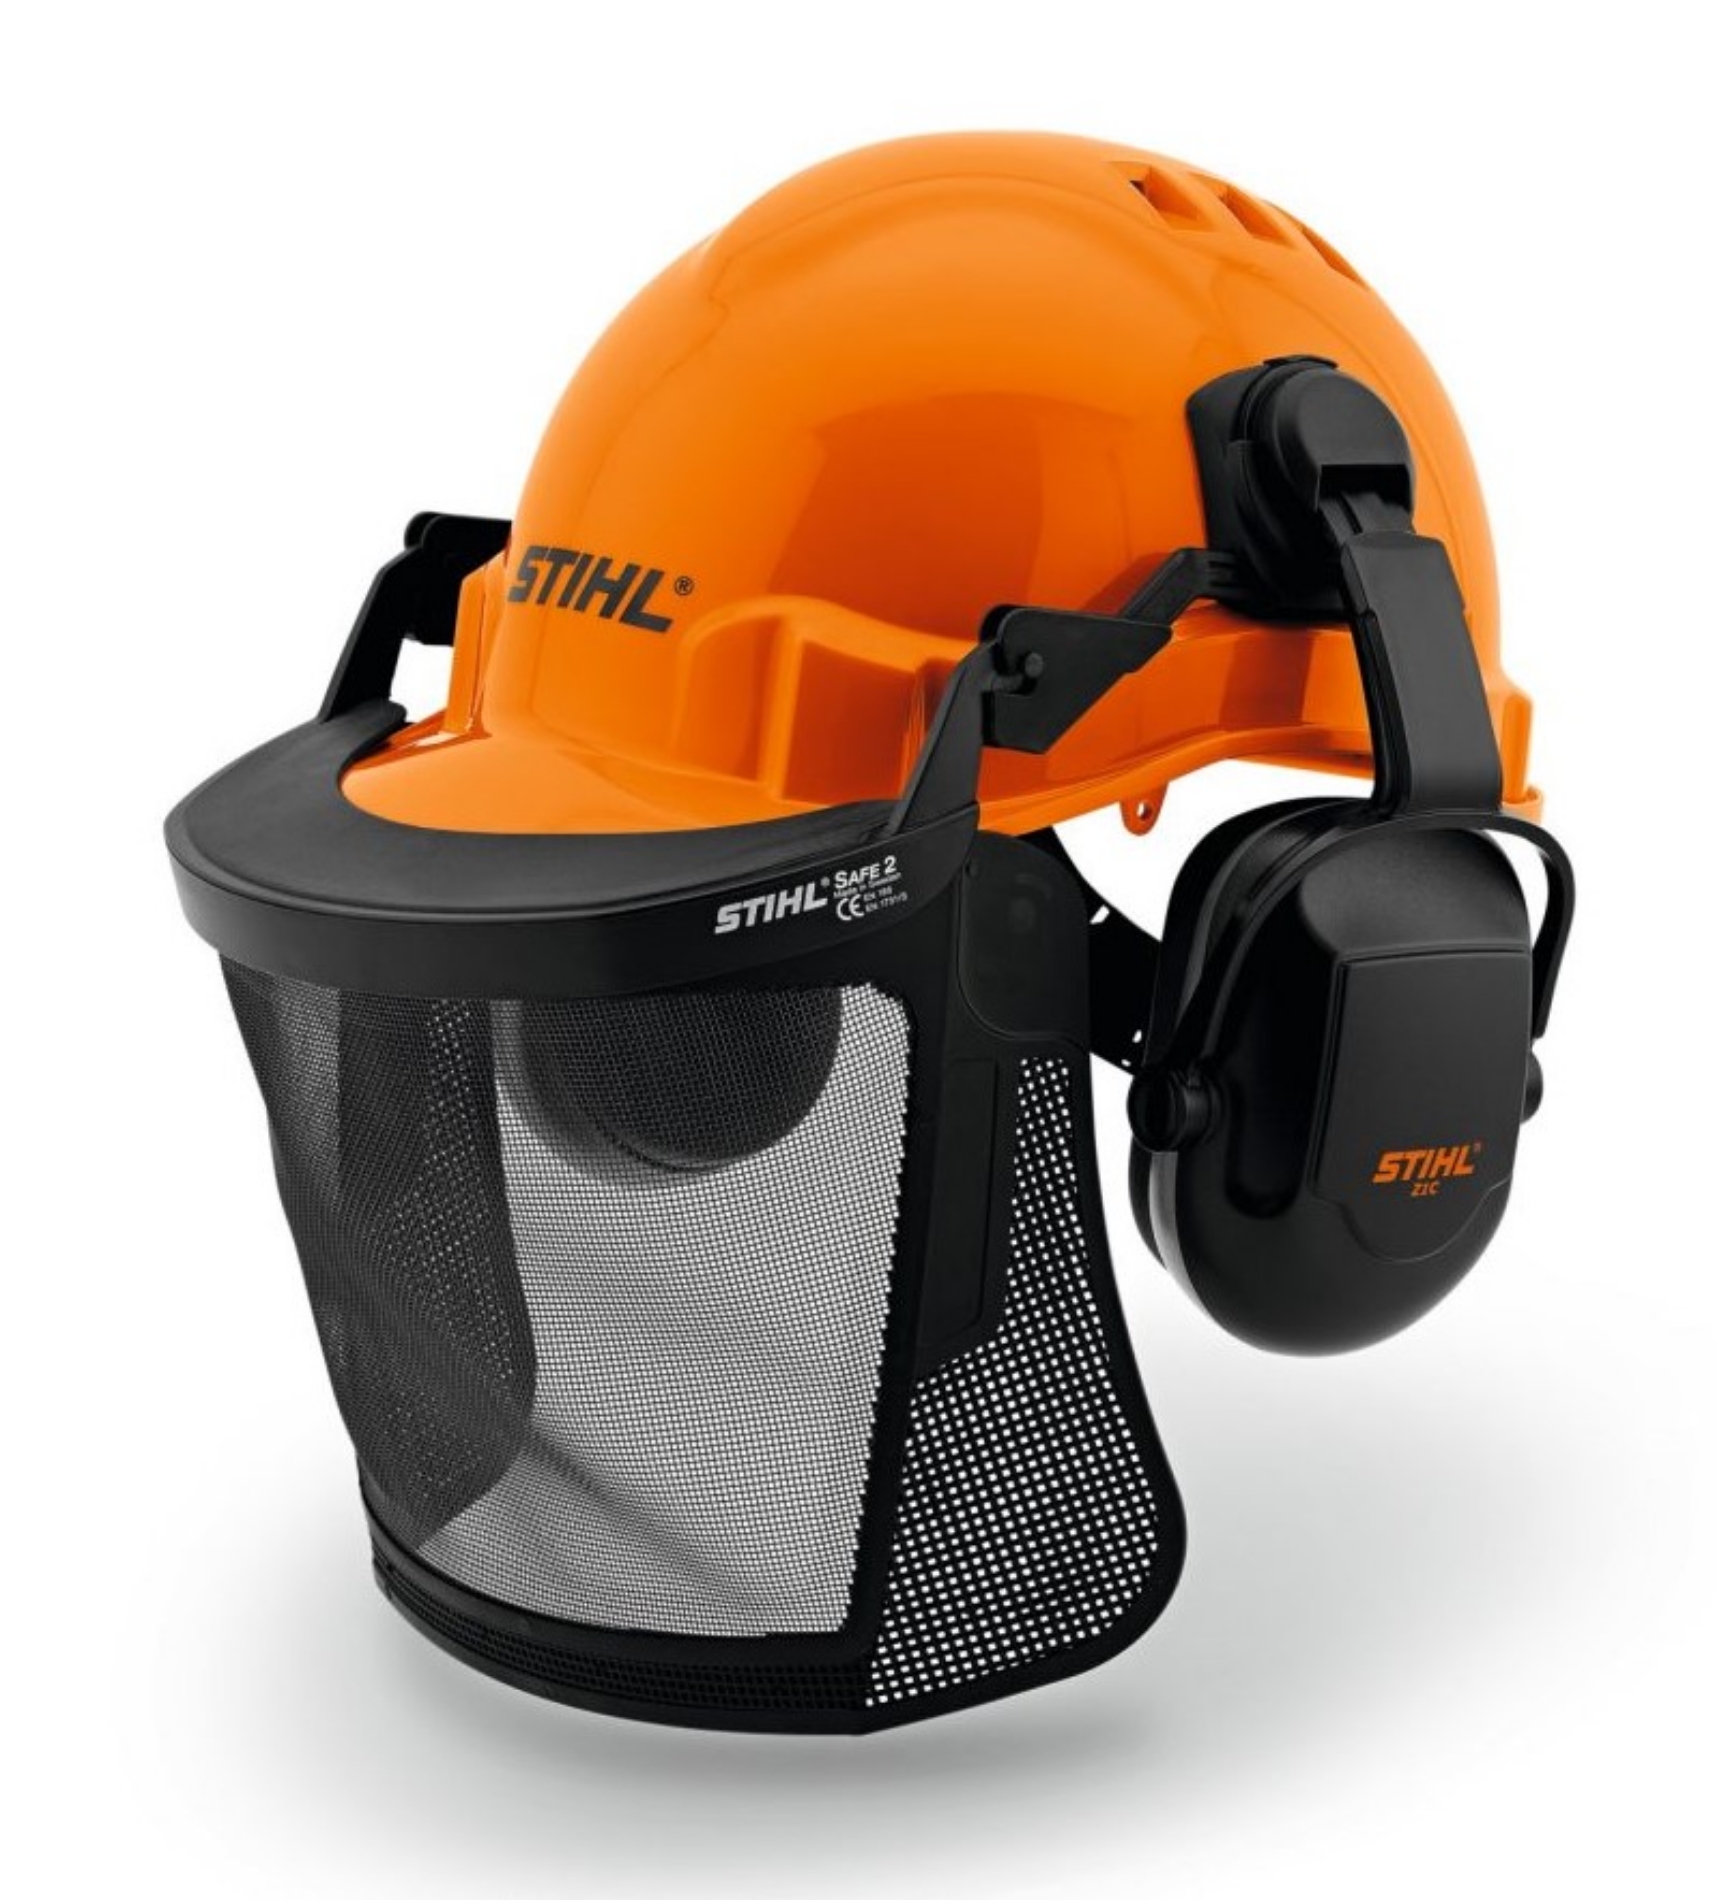 Picture of Stihl Function Basic Forestry Helmet Set